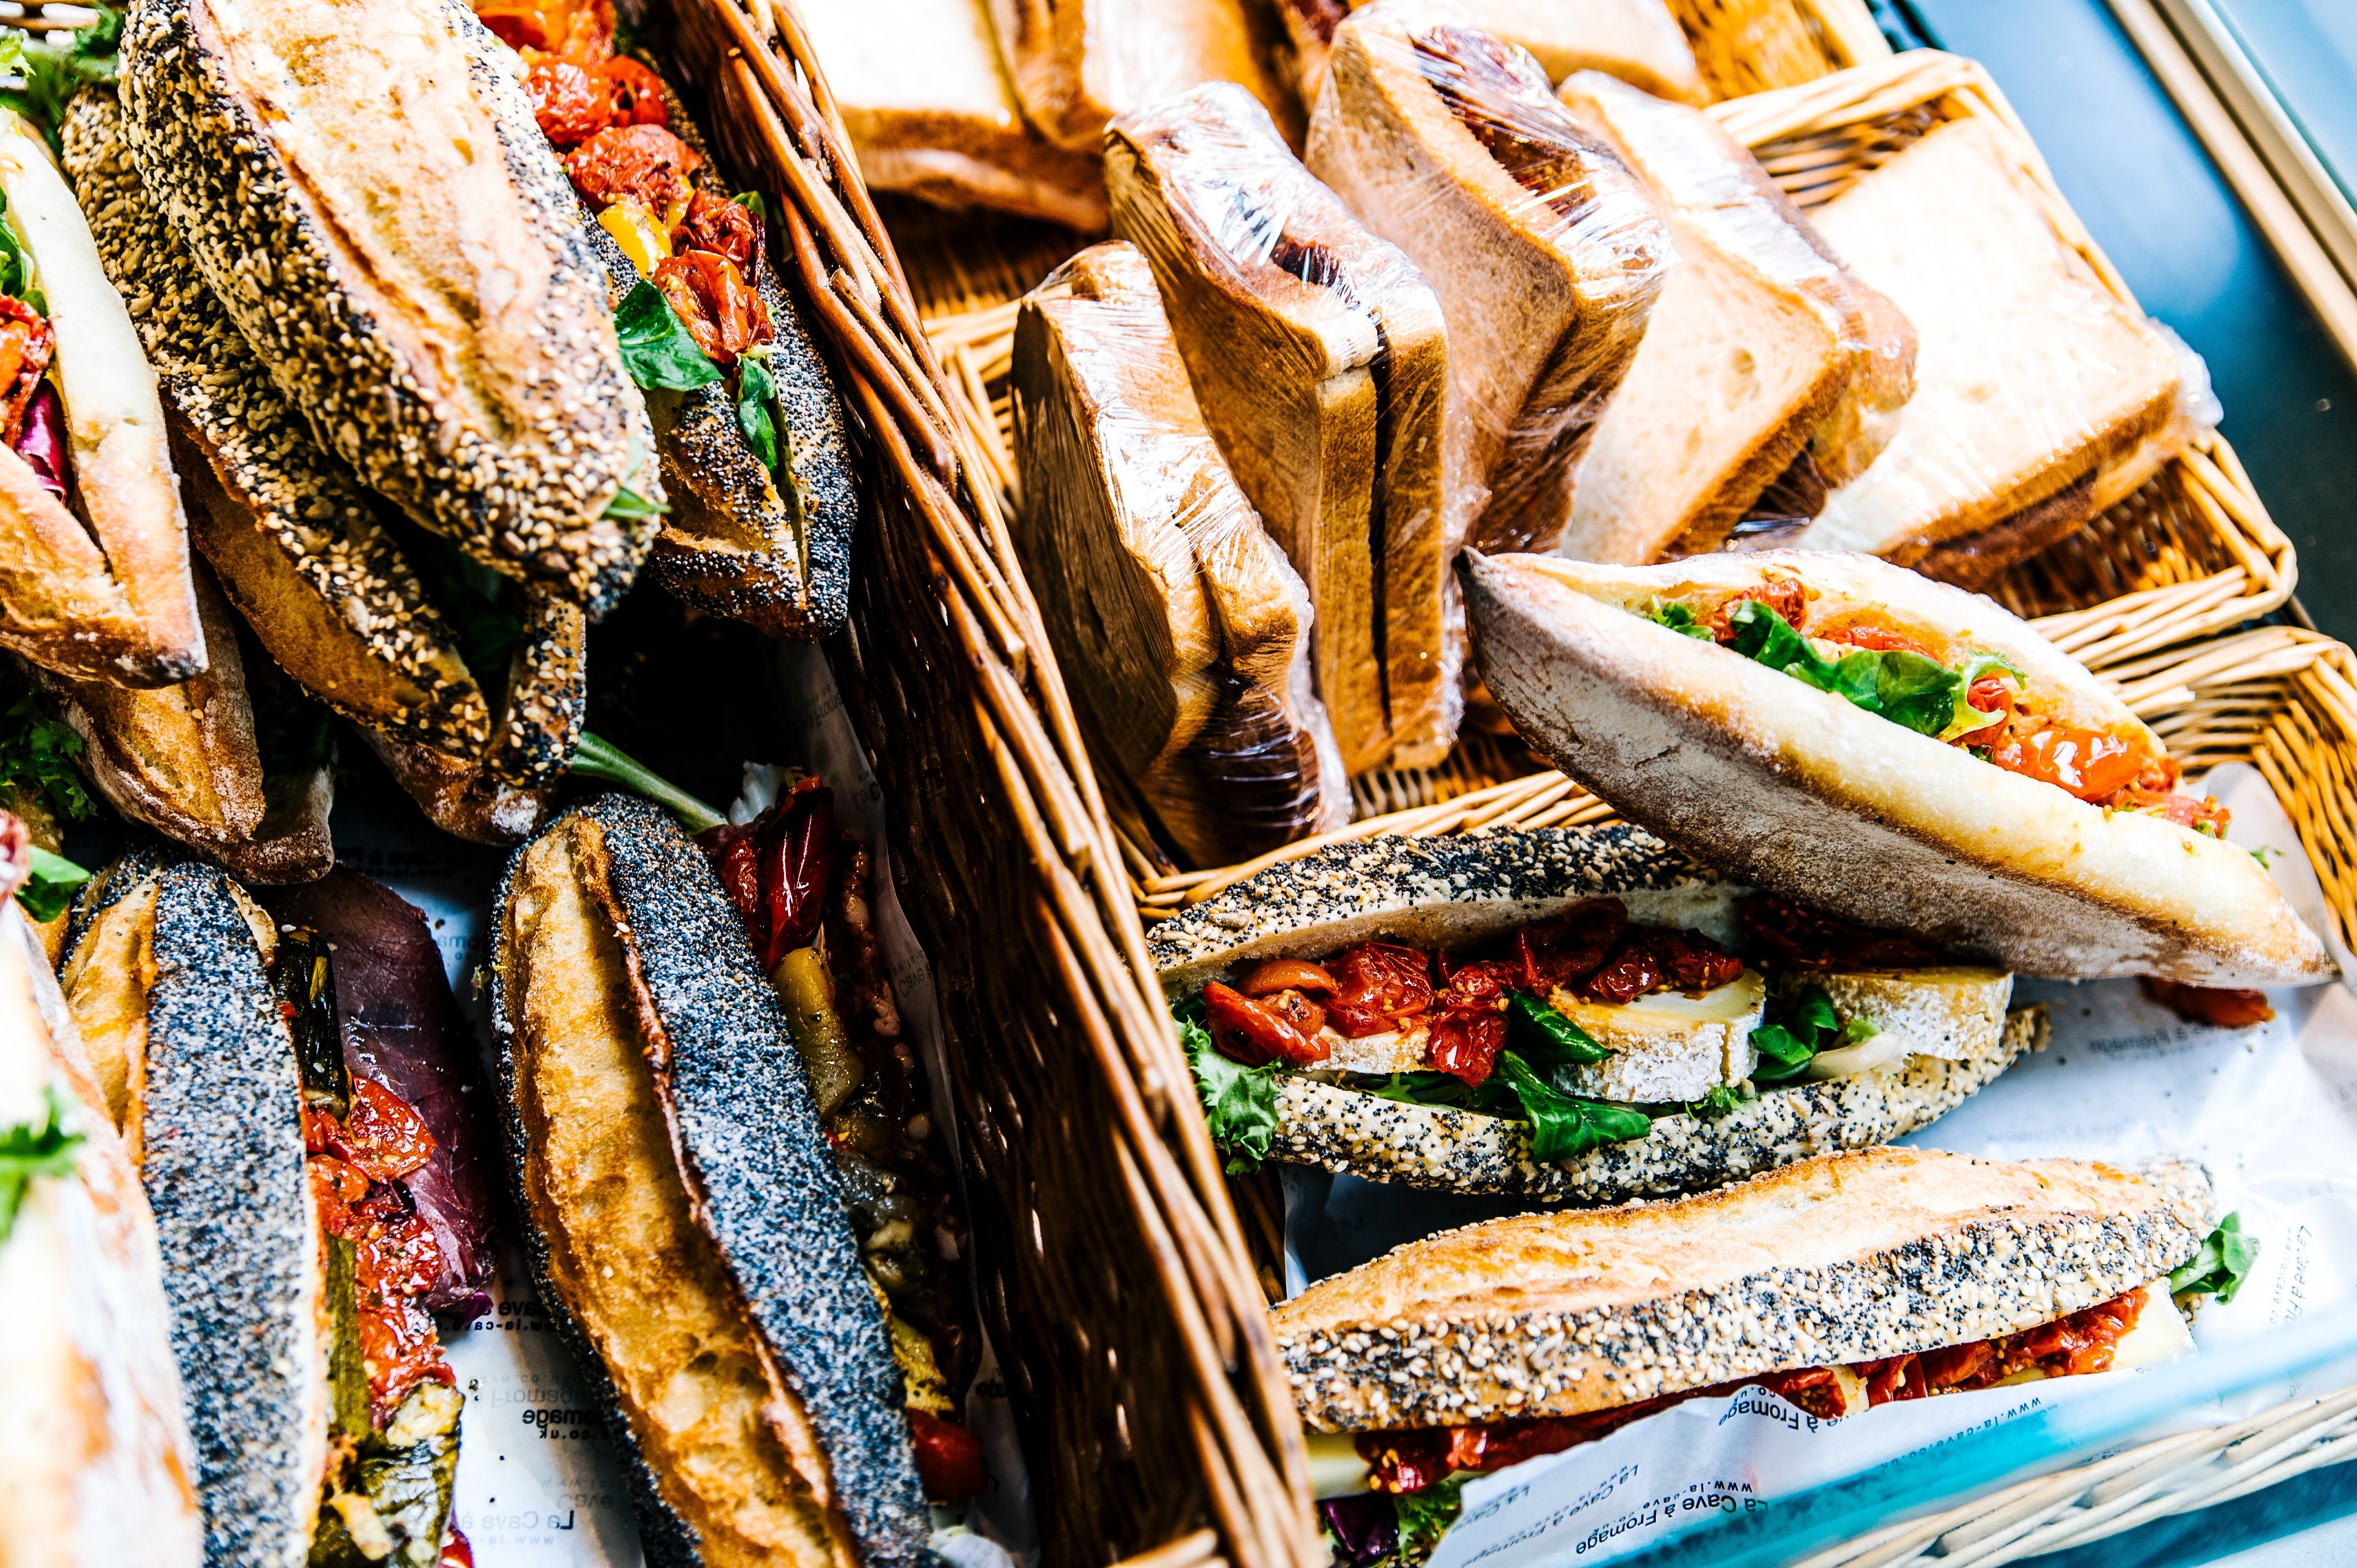 Justin brought some sandwiches from the deli. | Source: Pexels